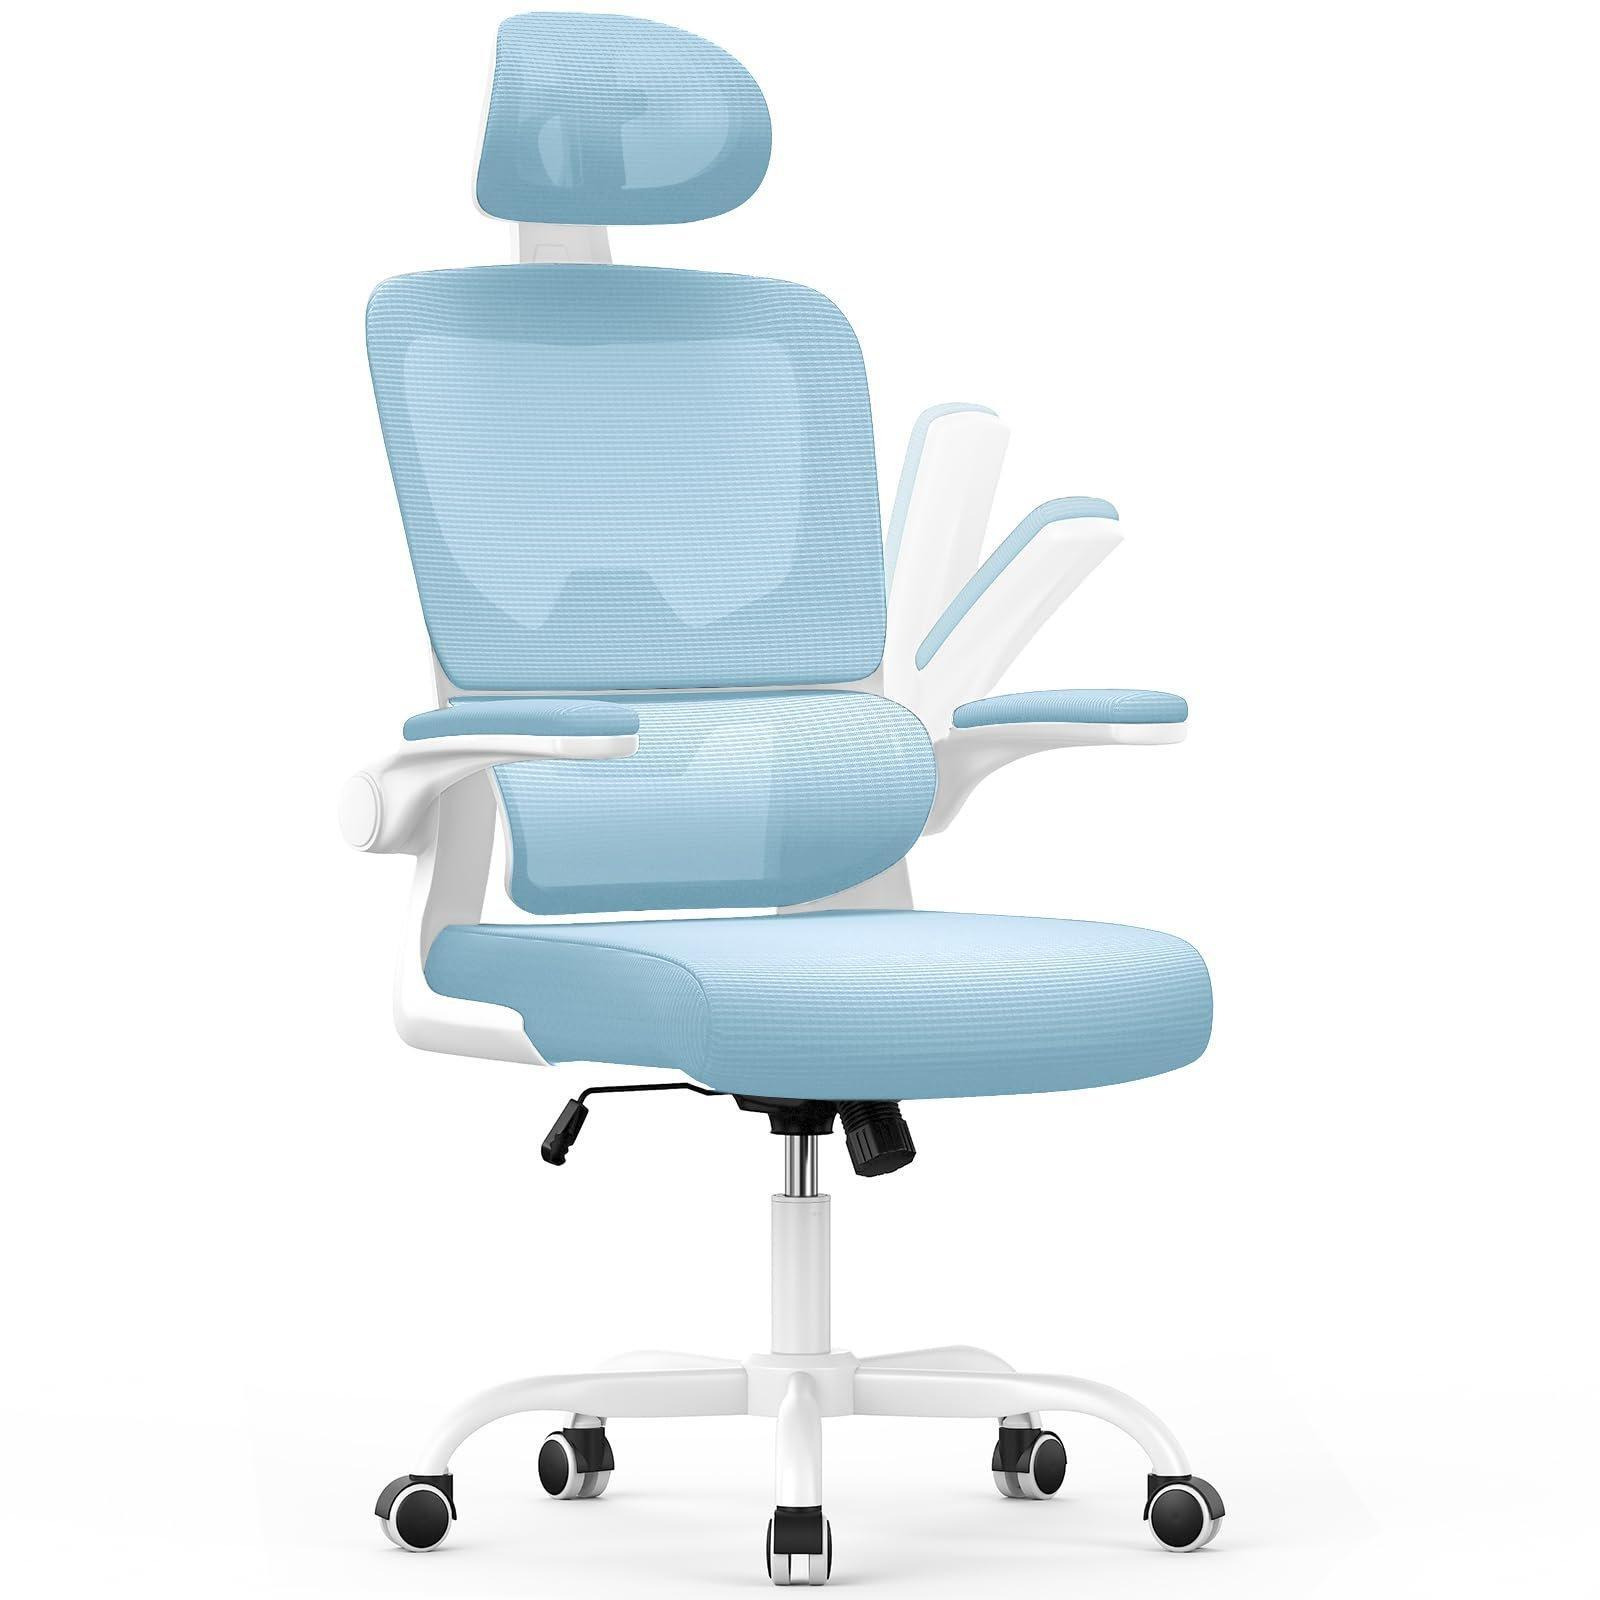 Swivel Computer Chair with Rocking Function, Adaptive Lumbar Support/Headrest/Flip-up Armrests - image 1